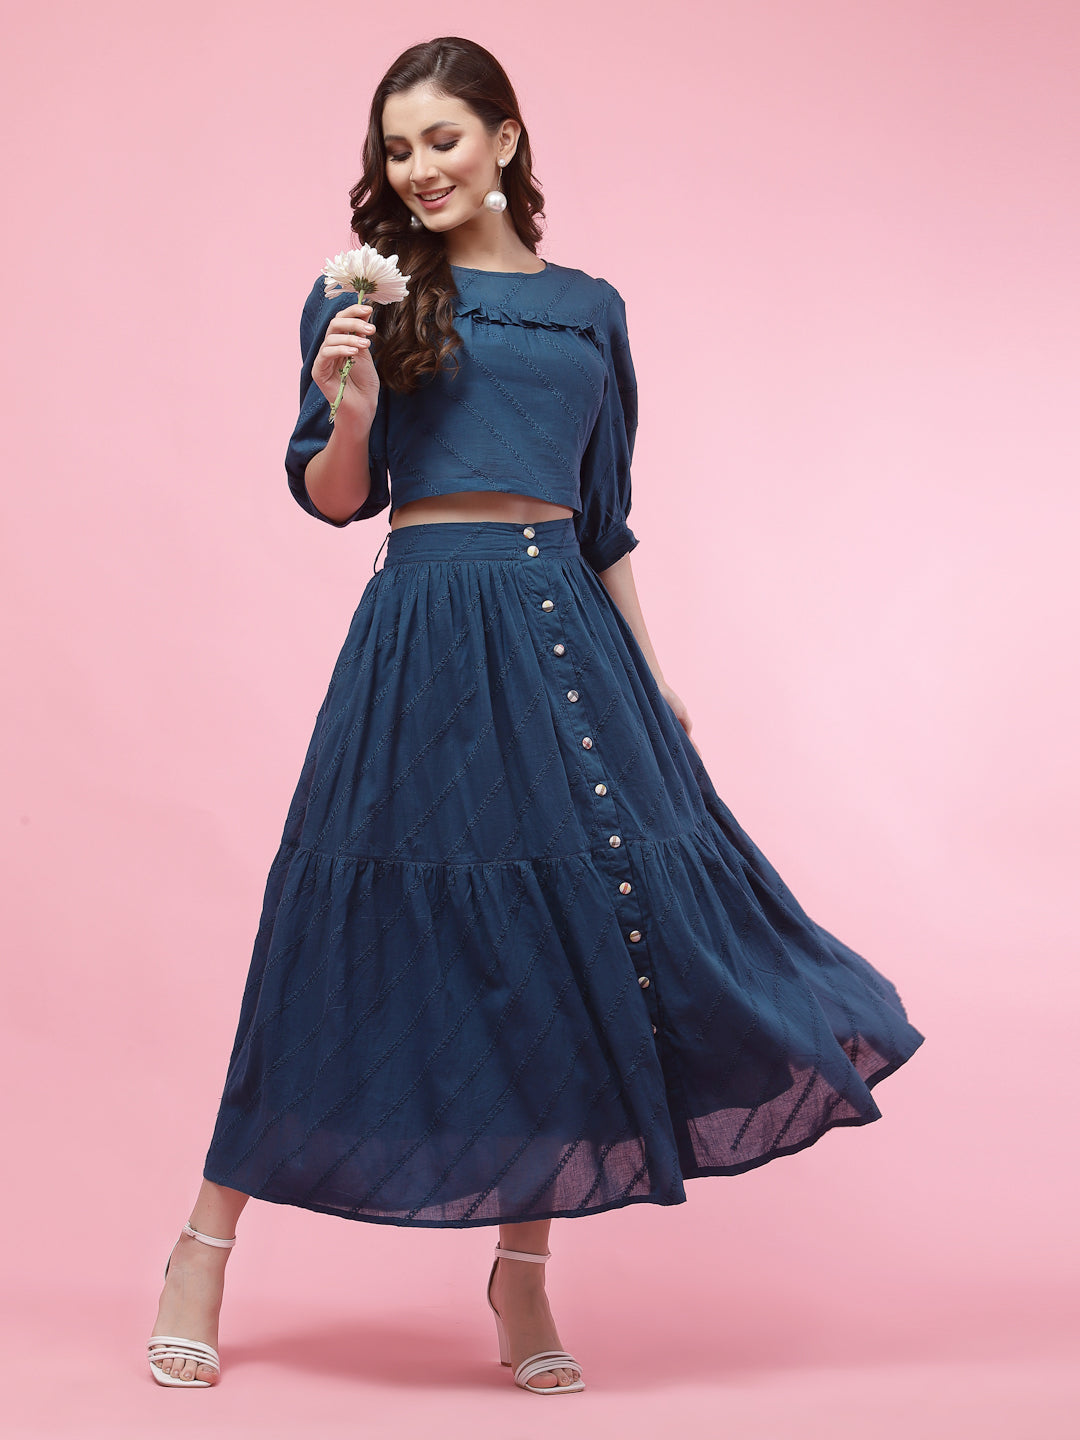 Terquois Yellow and Blue Self-Design Casual Skirt-Top with gathers Coordinate Sets TERQUOIS S Blue 